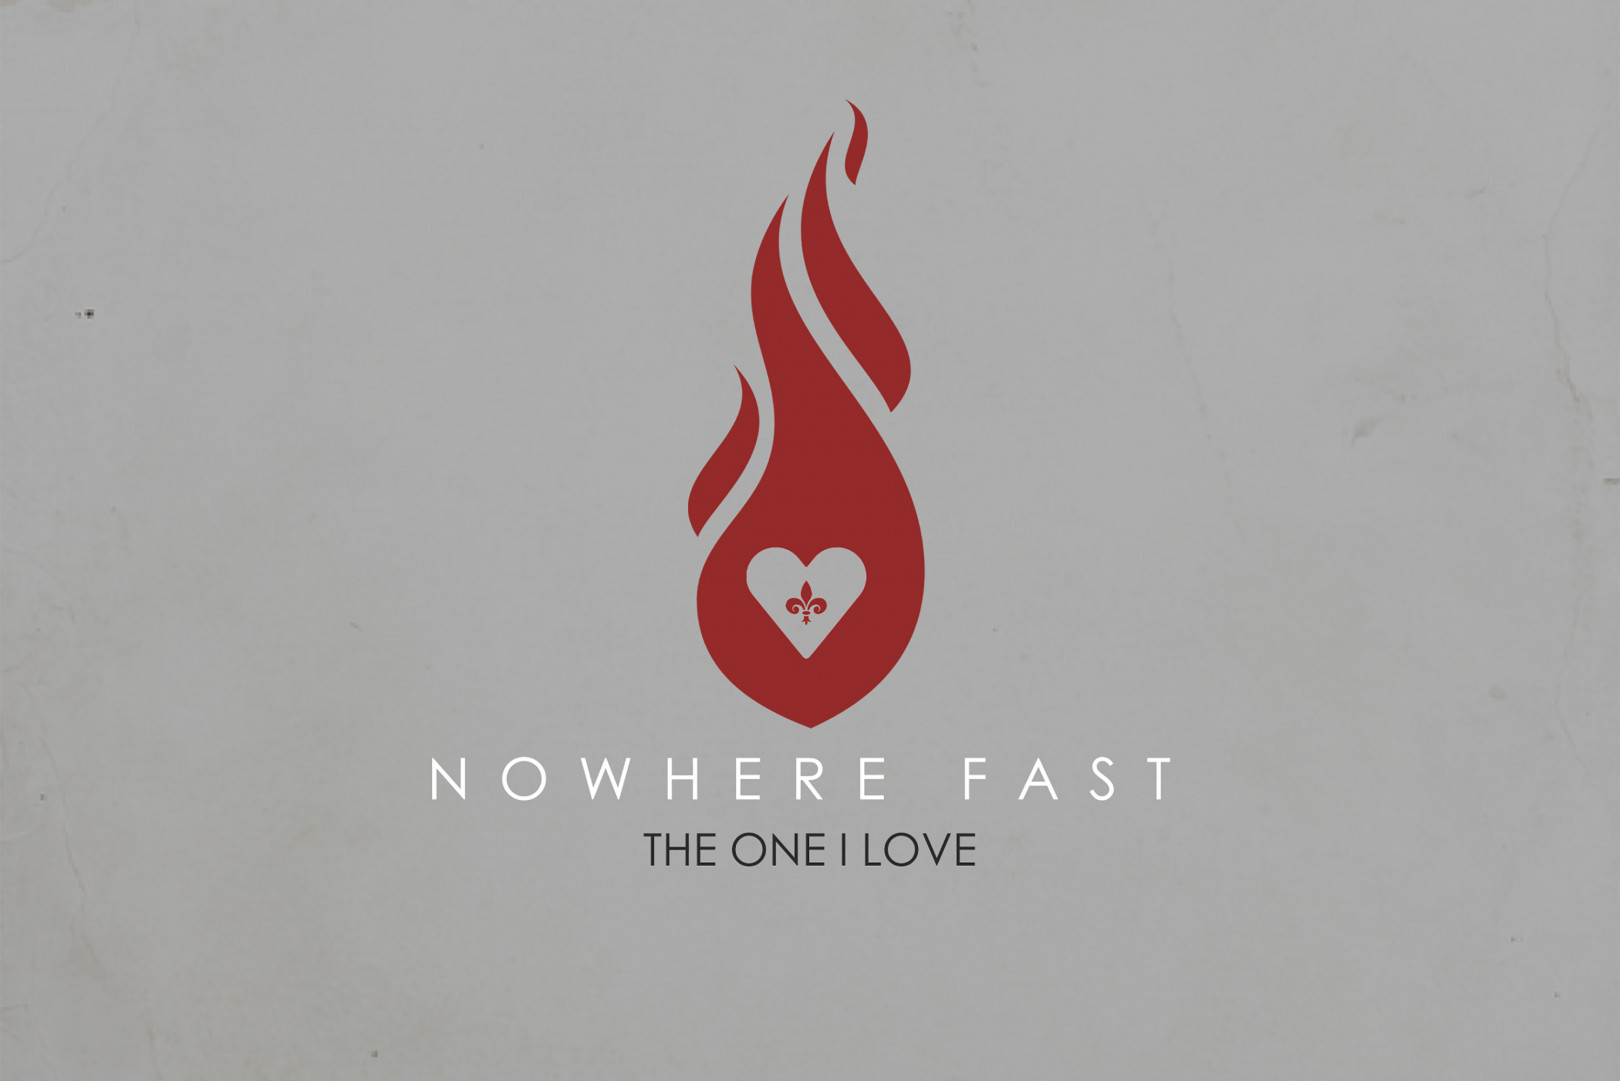 Nowhere Fast announce two track single